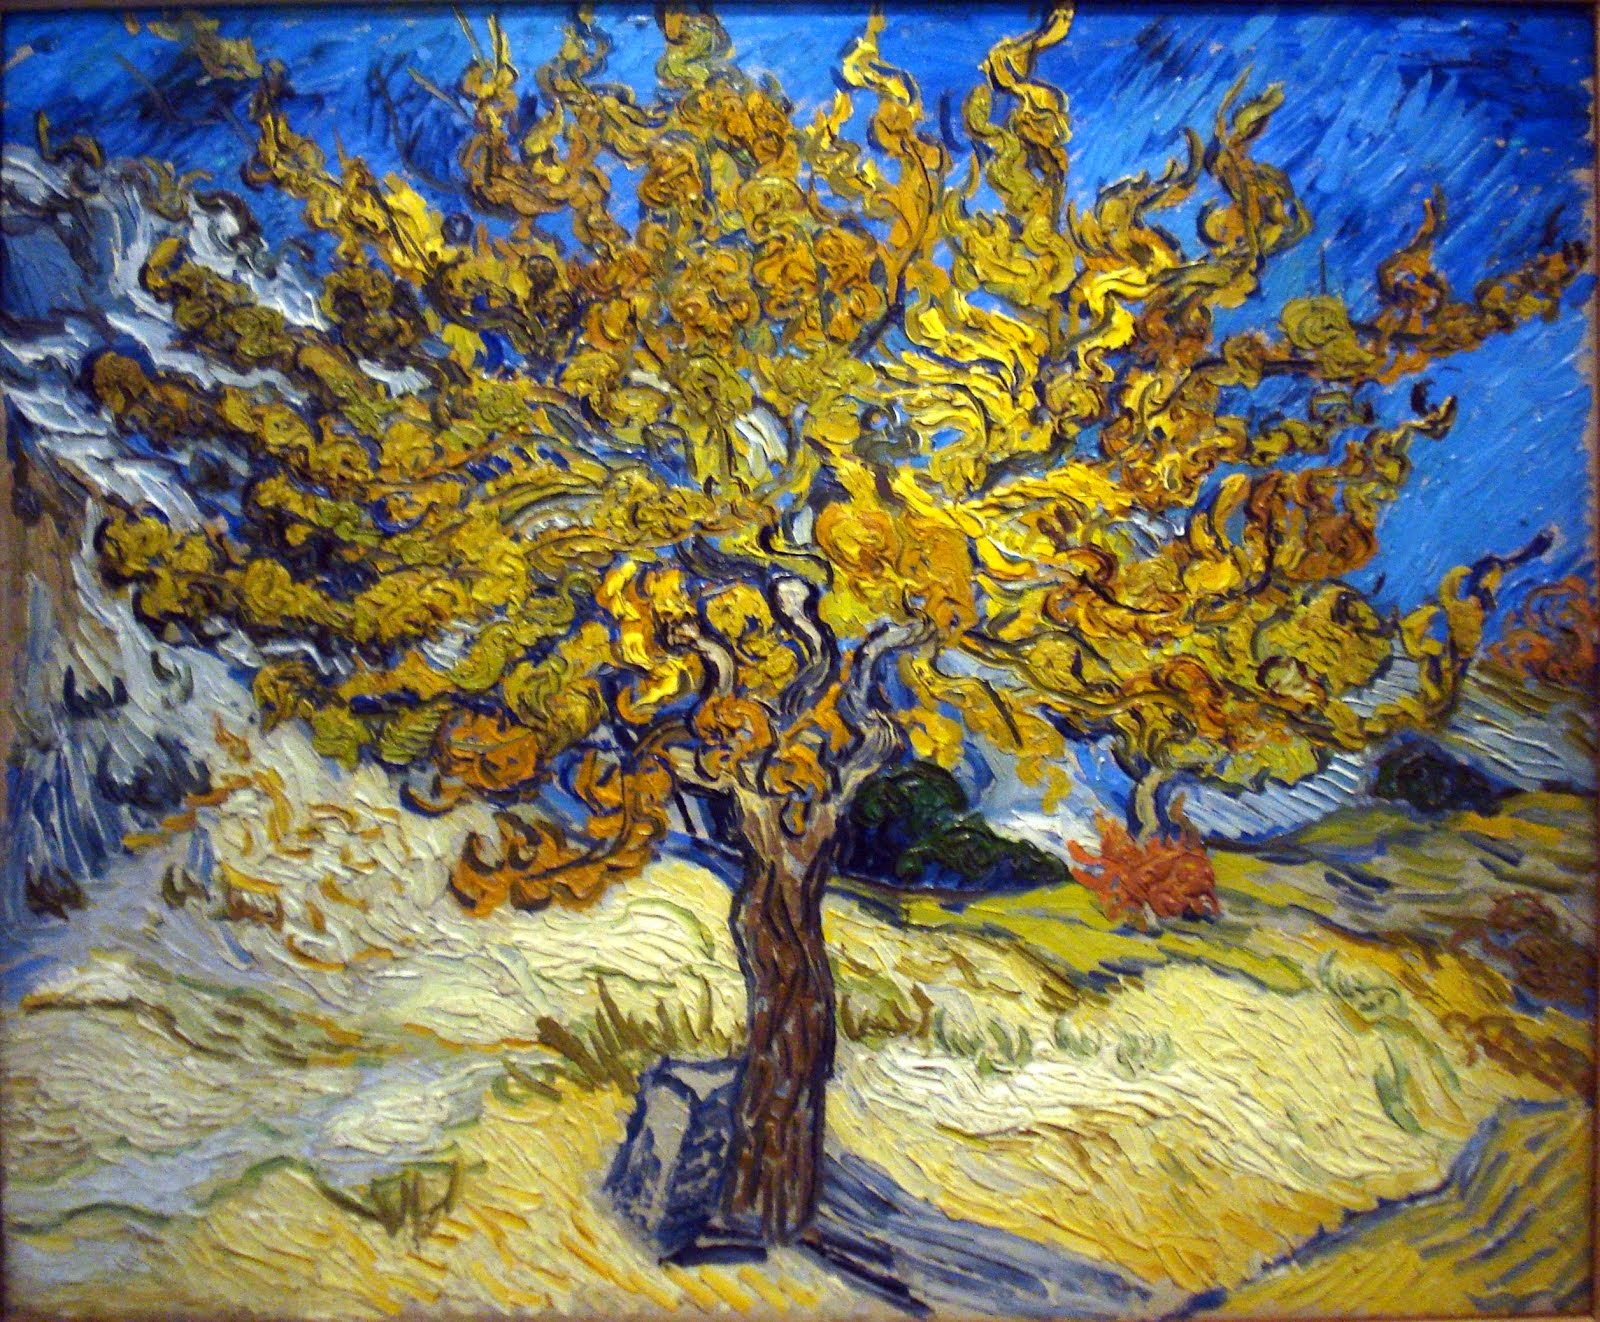 Vincent Van Gogh's "The Mulberrty Tree"